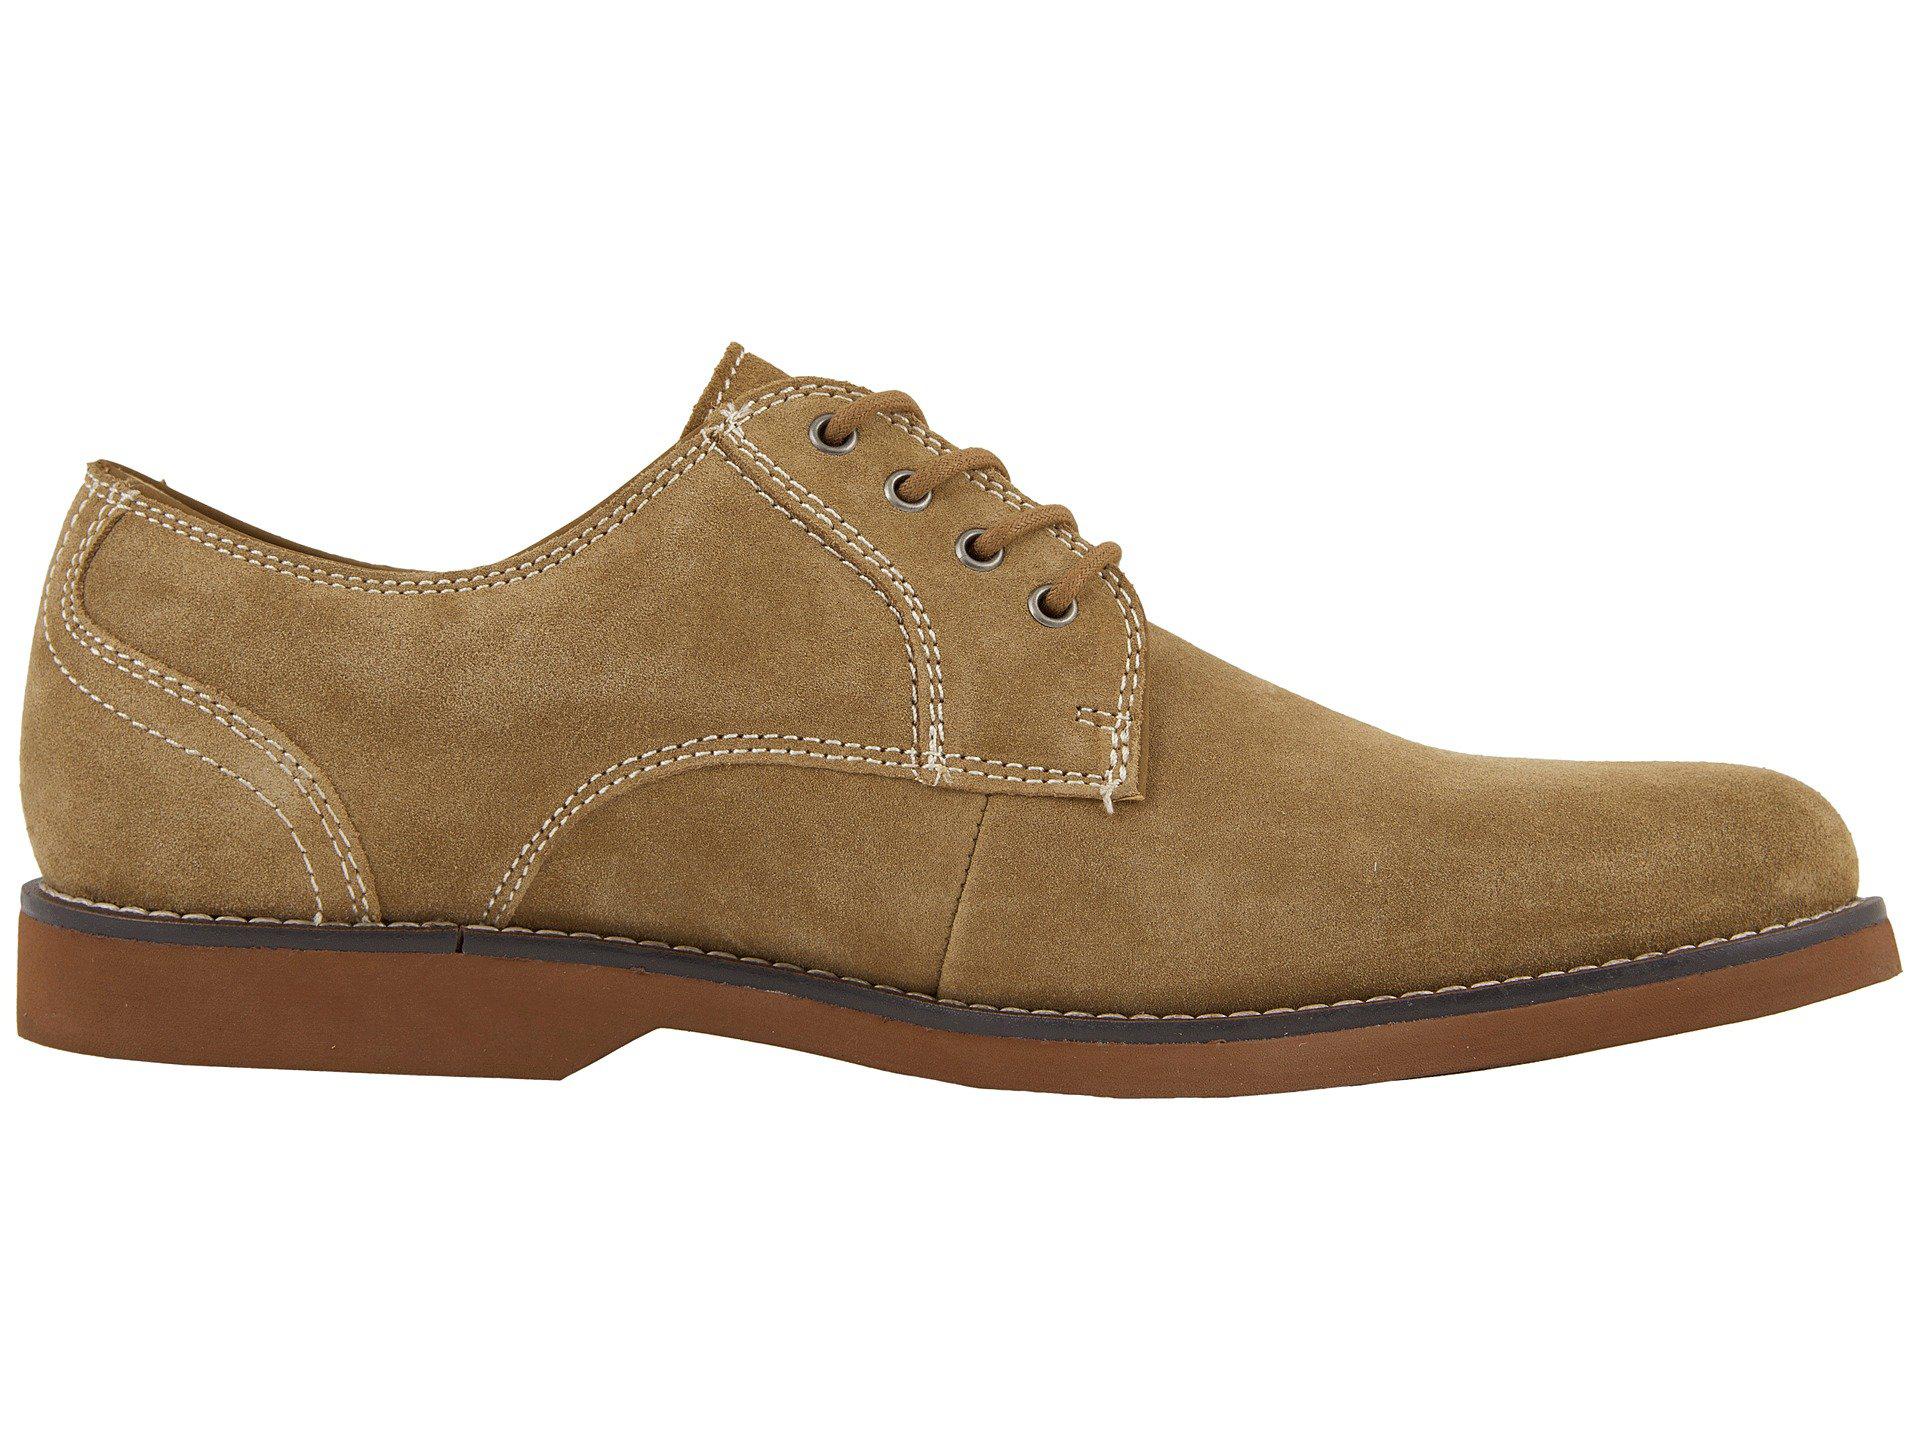 G.H.BASS Proctor (dirty Buck Suede) Shoes in Brown for Men - Lyst